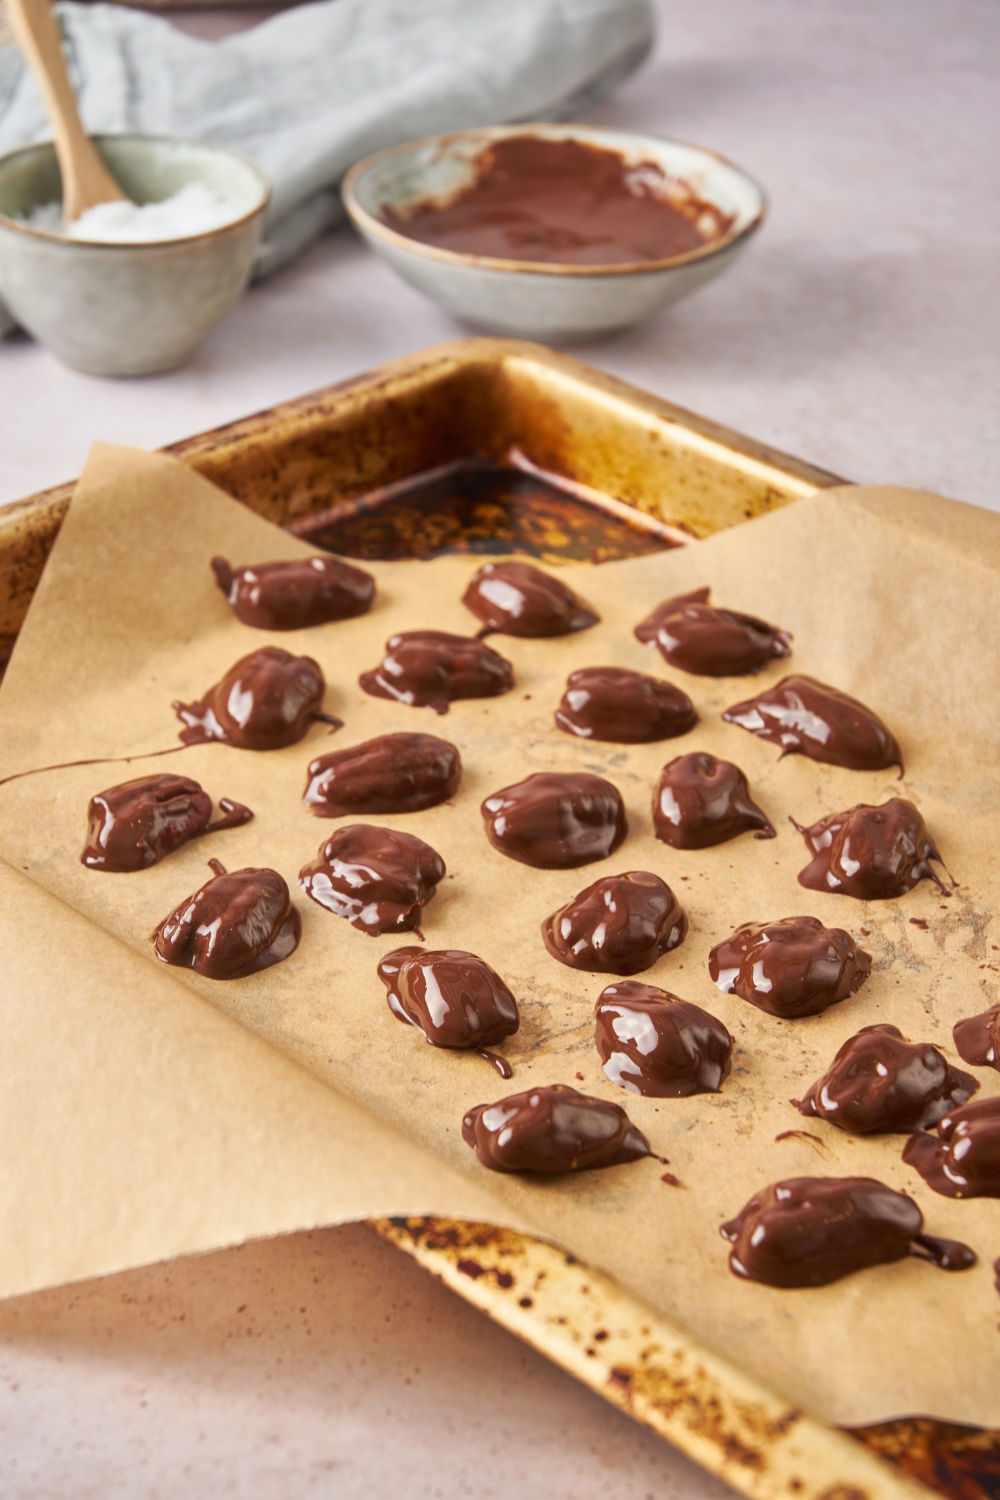 A baking sheet lined with parchment paper with chocolate covered pecans